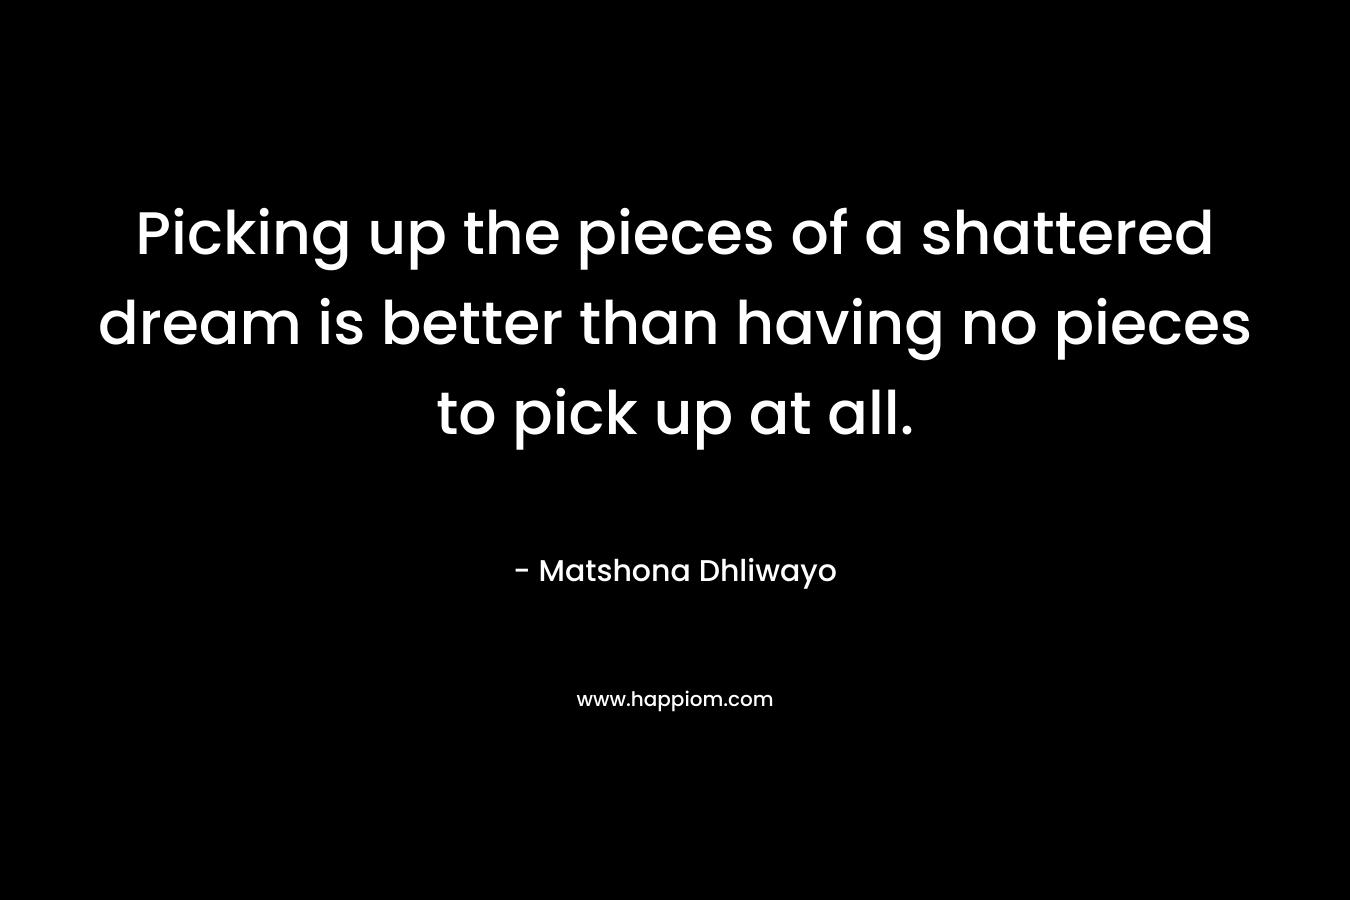 Picking up the pieces of a shattered dream is better than having no pieces to pick up at all.